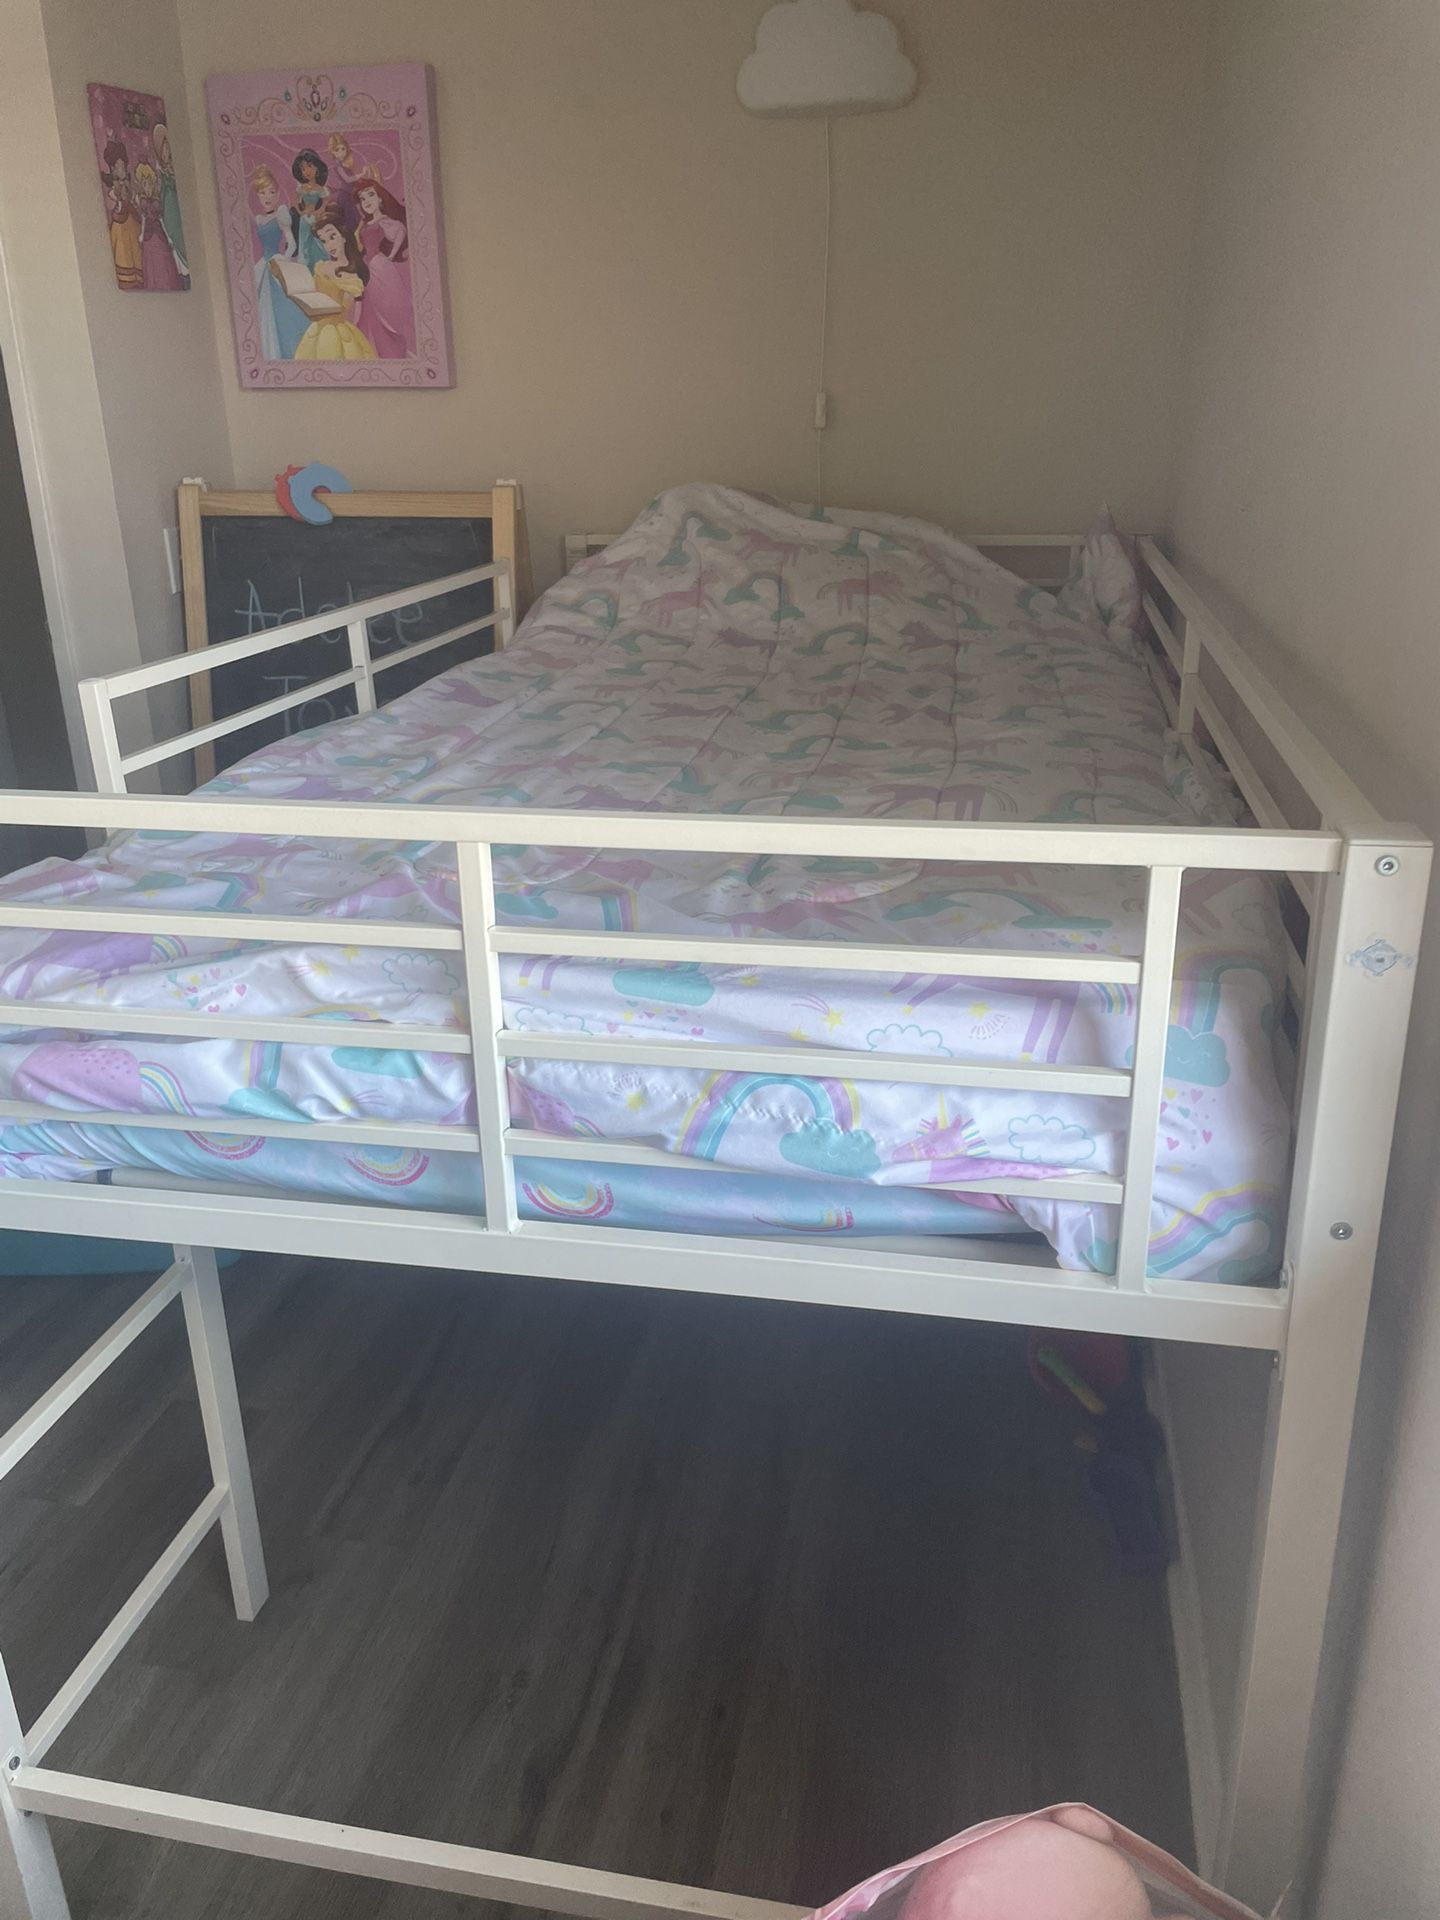 Bunk Bed With Slide 